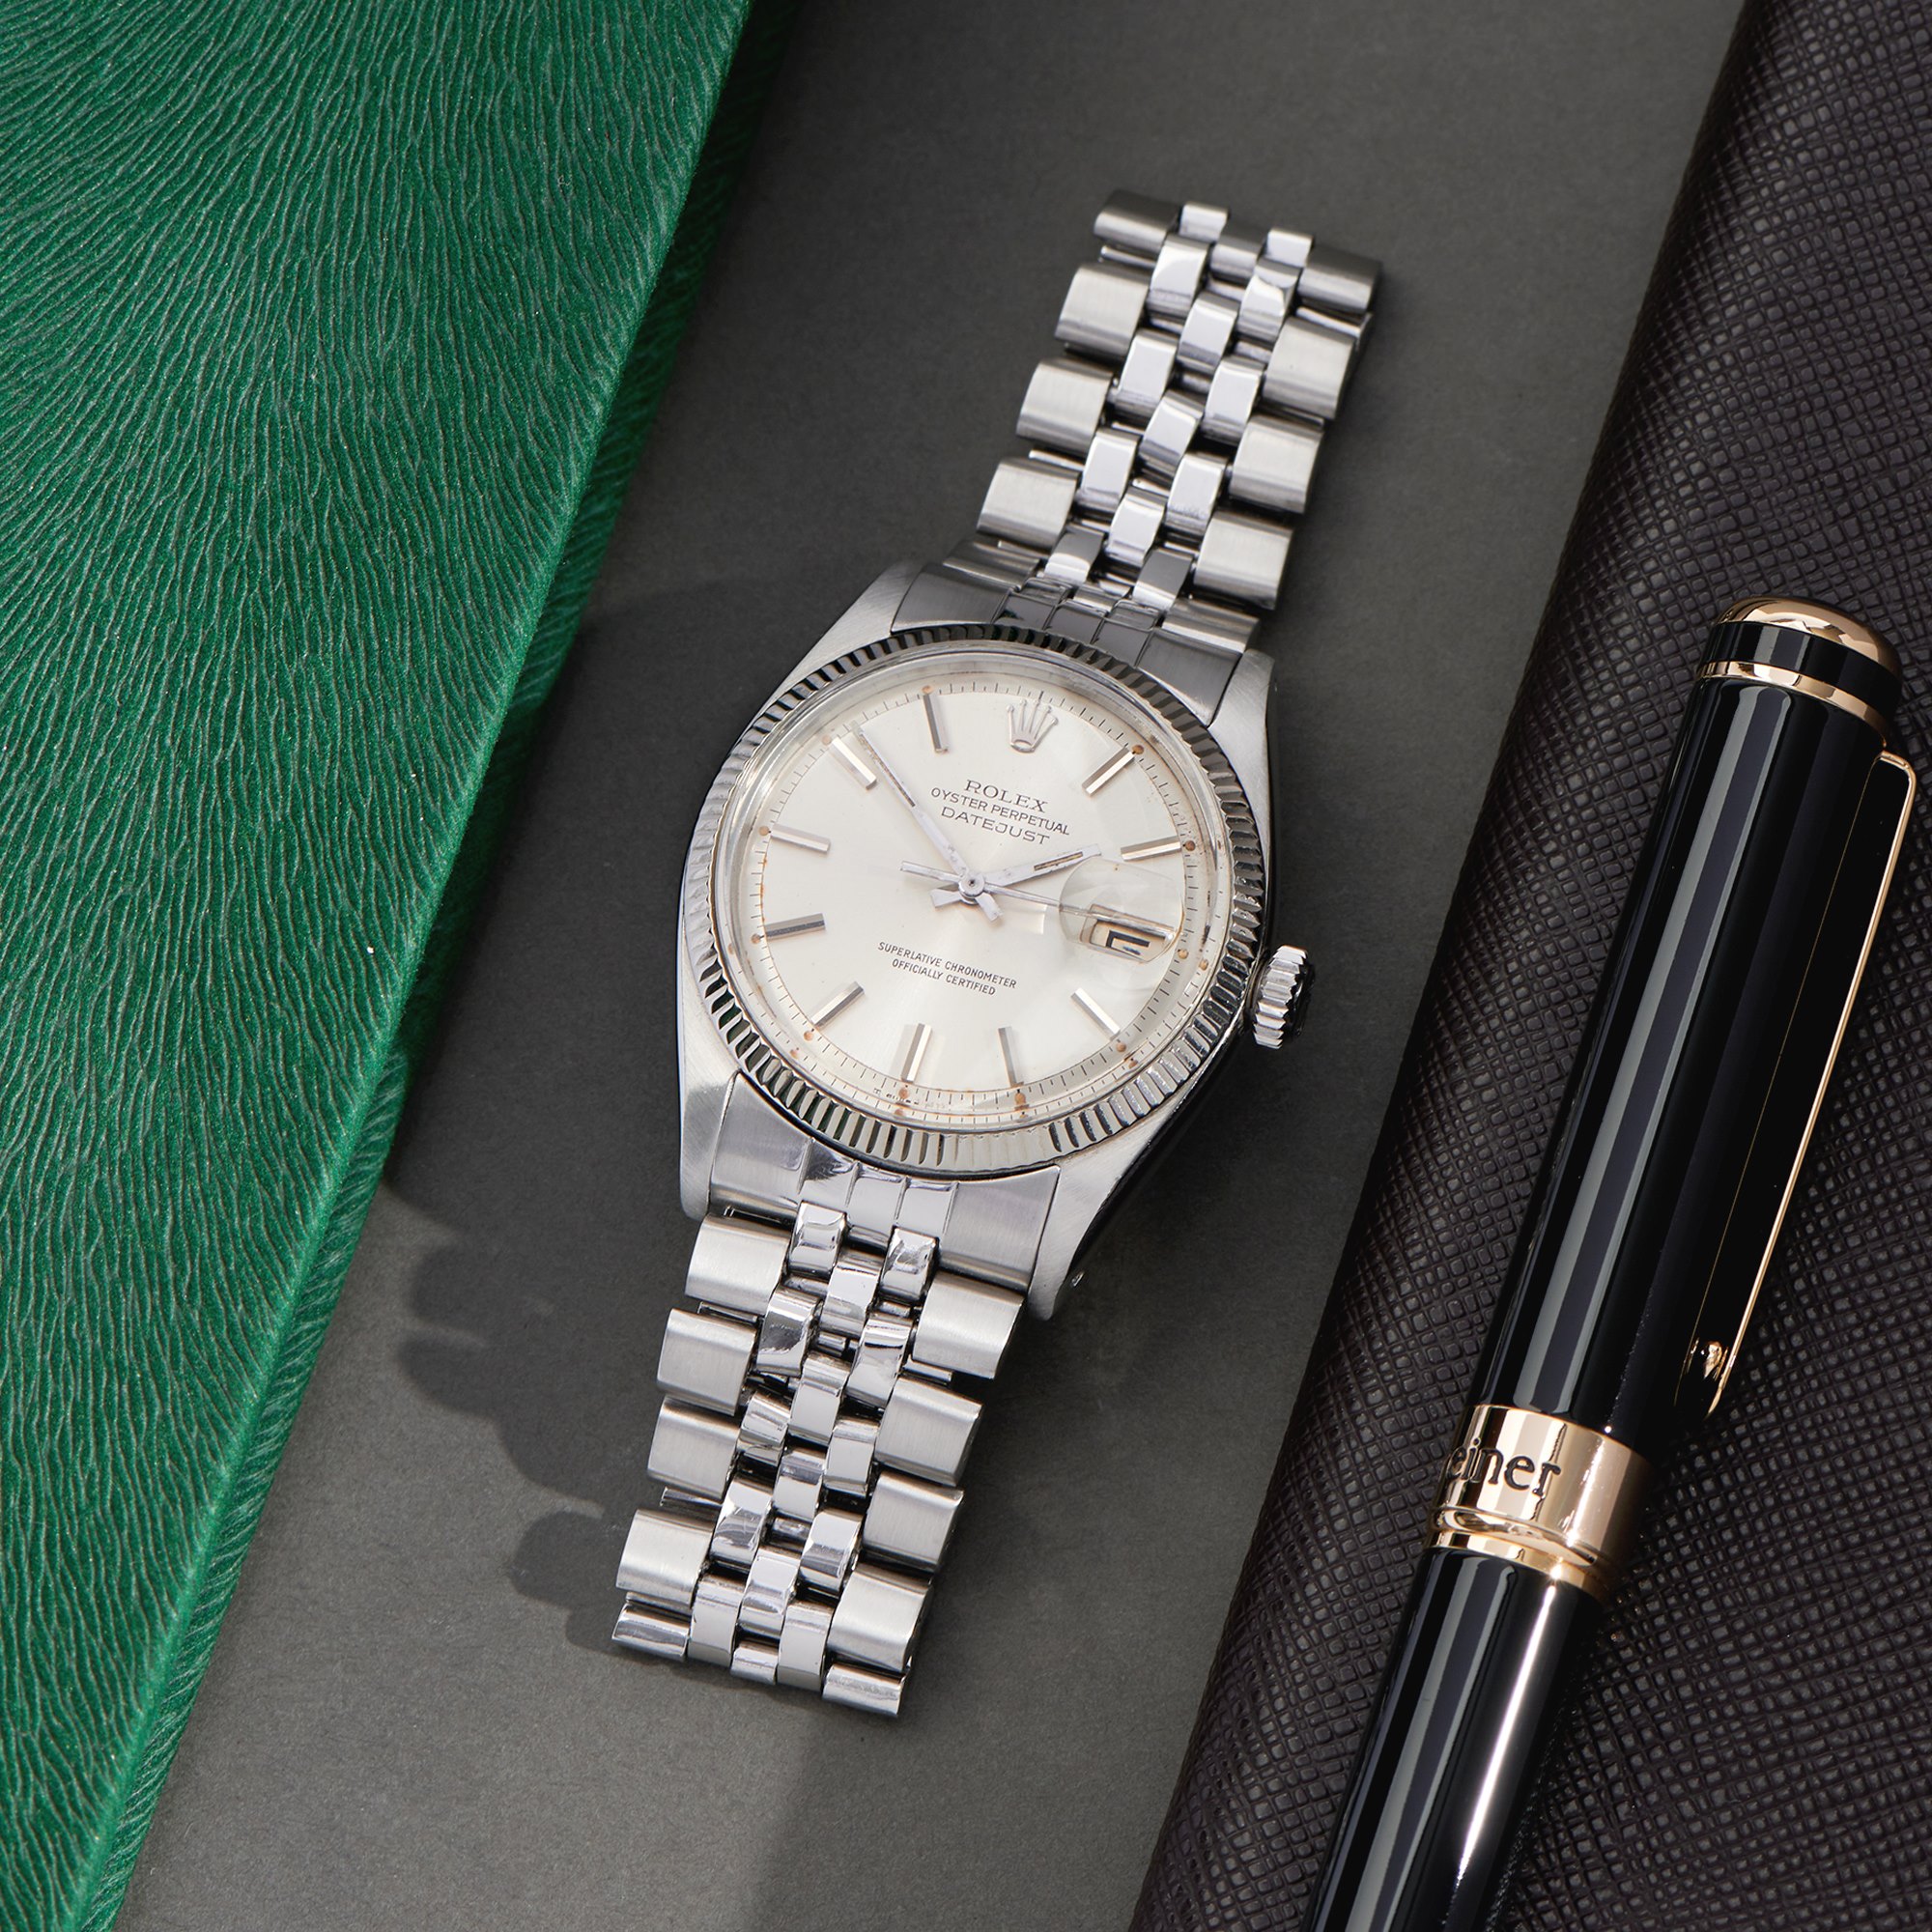 Rolex Datejust 36 White Gold & Stainless Steel 1601